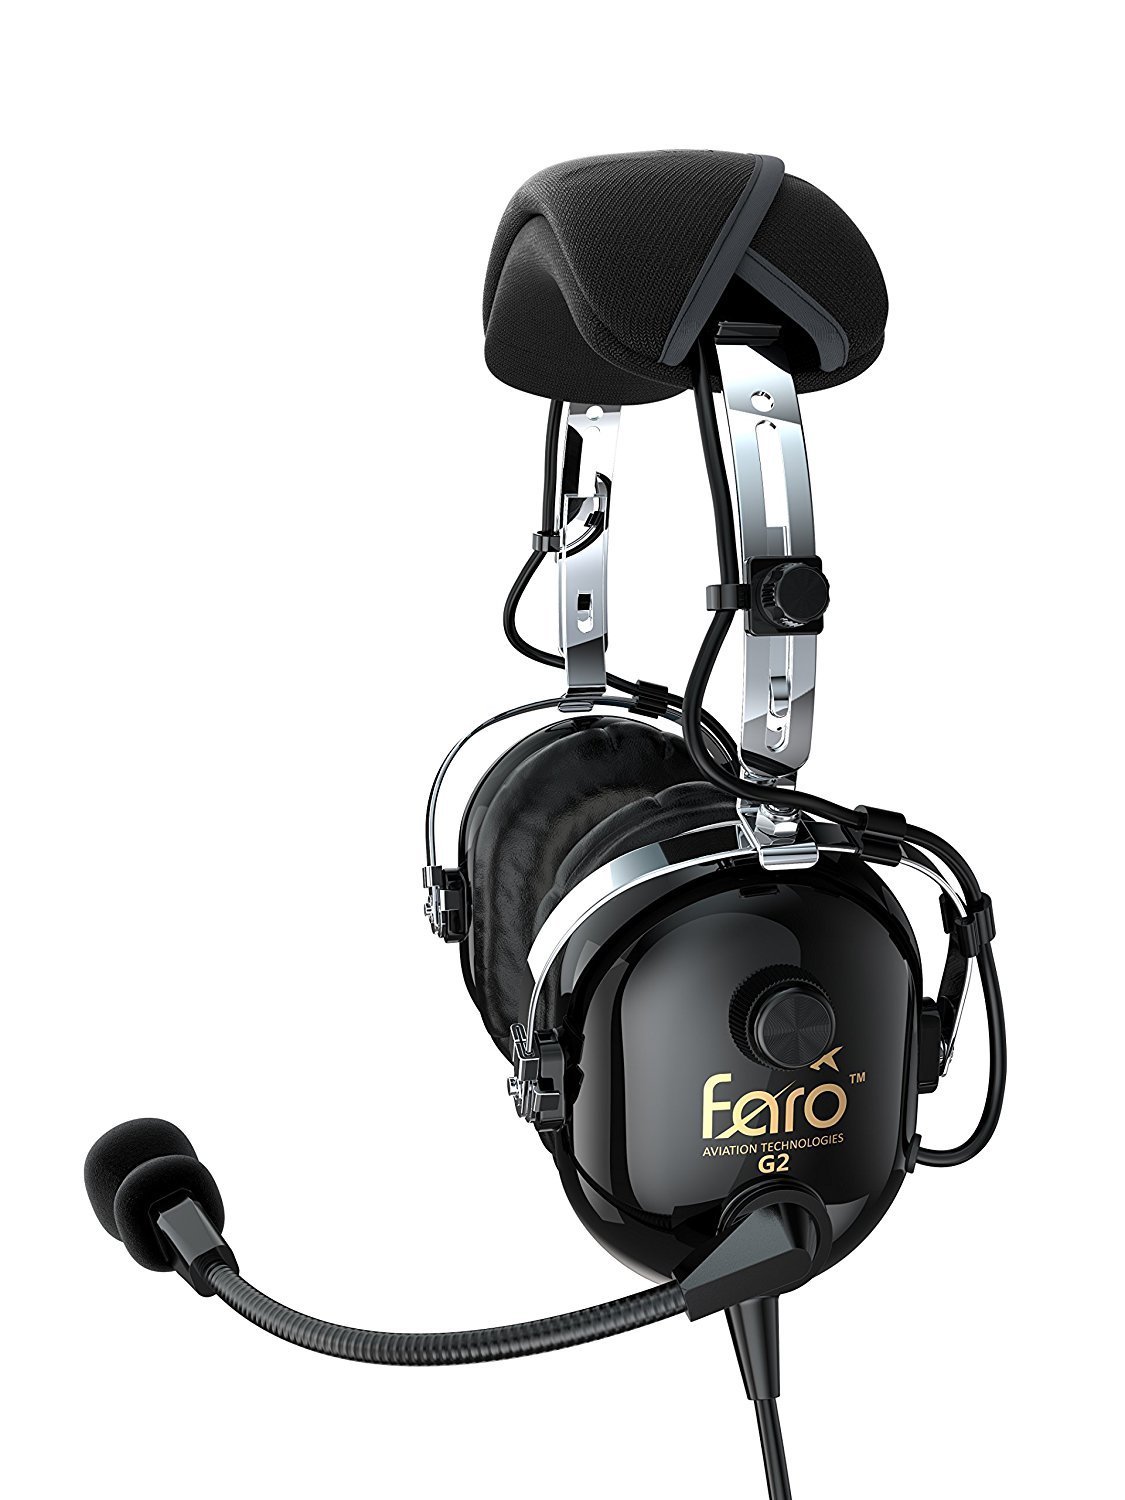 Faro G2 ANR (Active Noise Reduction) Premium Pilot Aviation Headset with Mp3 Input - Black